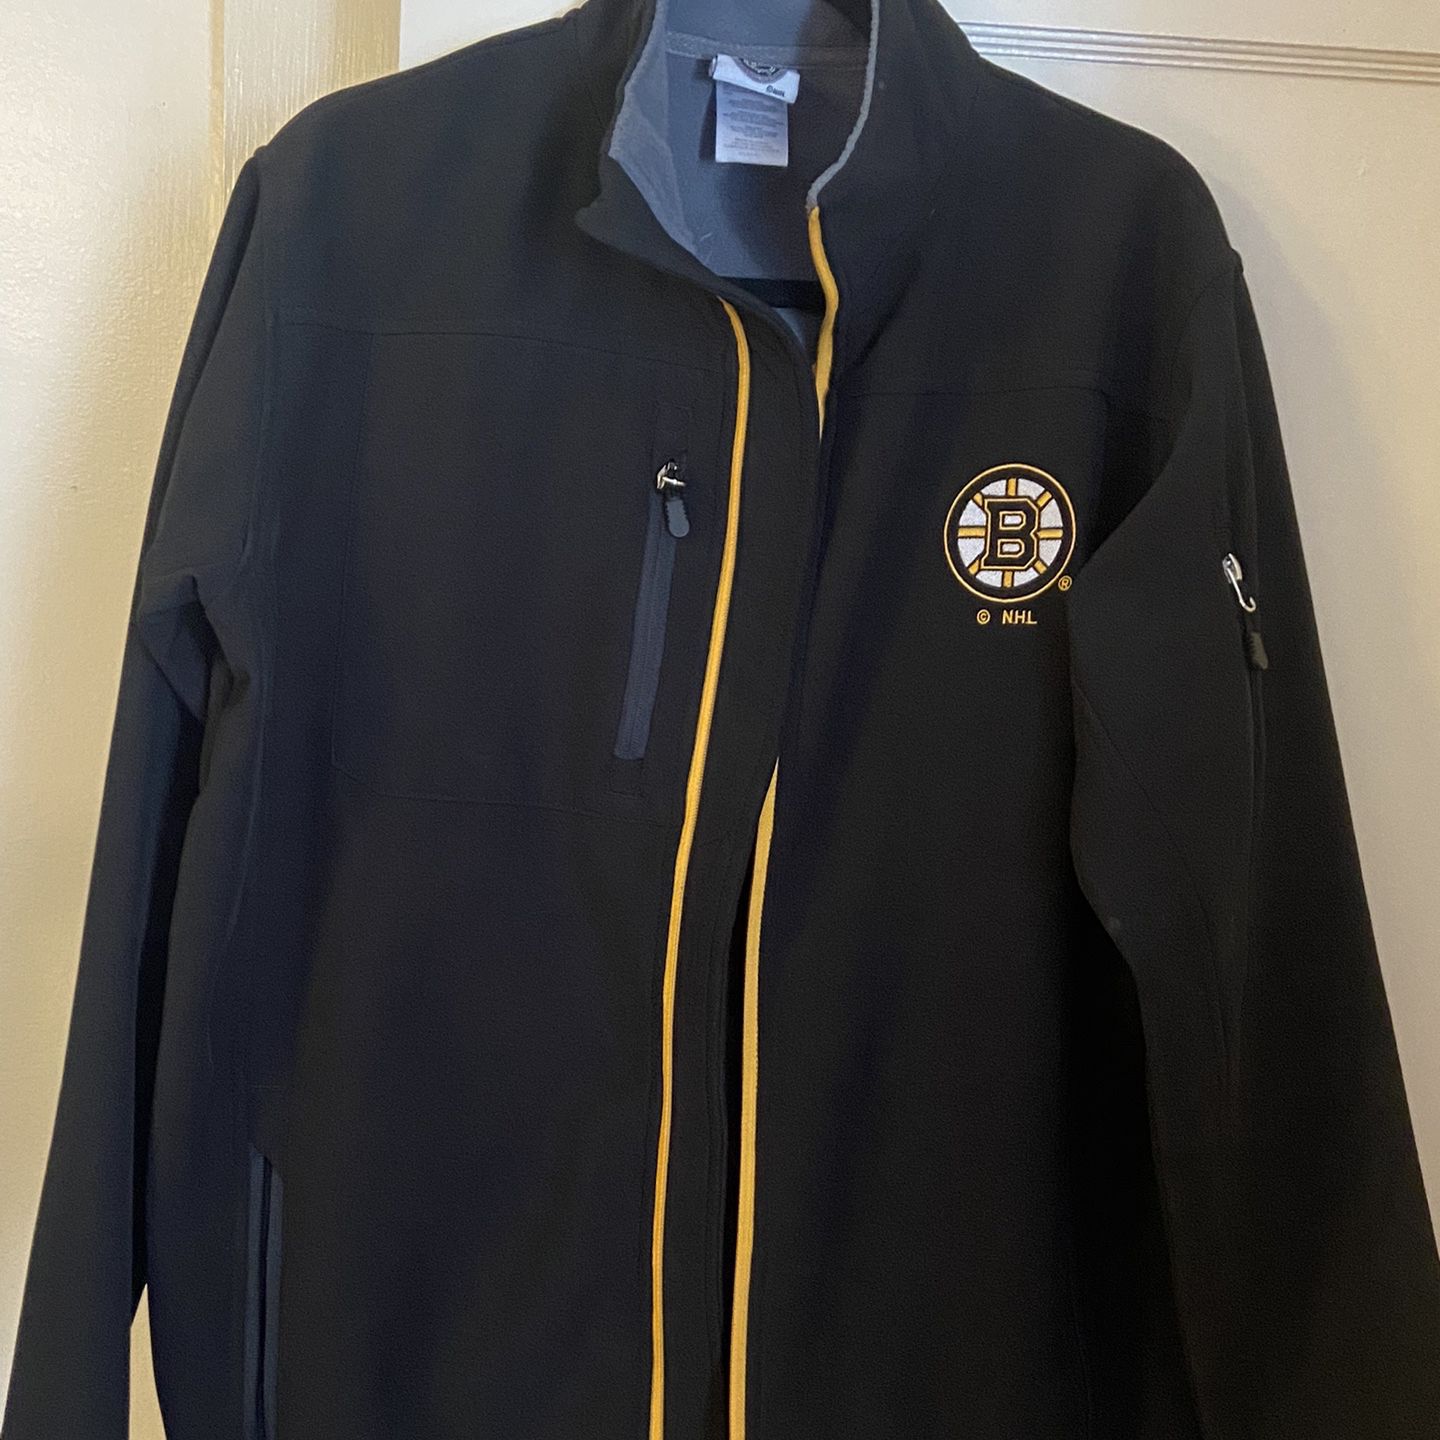 Bruins Gear - Jacket Med., 2011 Stanley Cup Picture - Hat And 3/4 Zip 